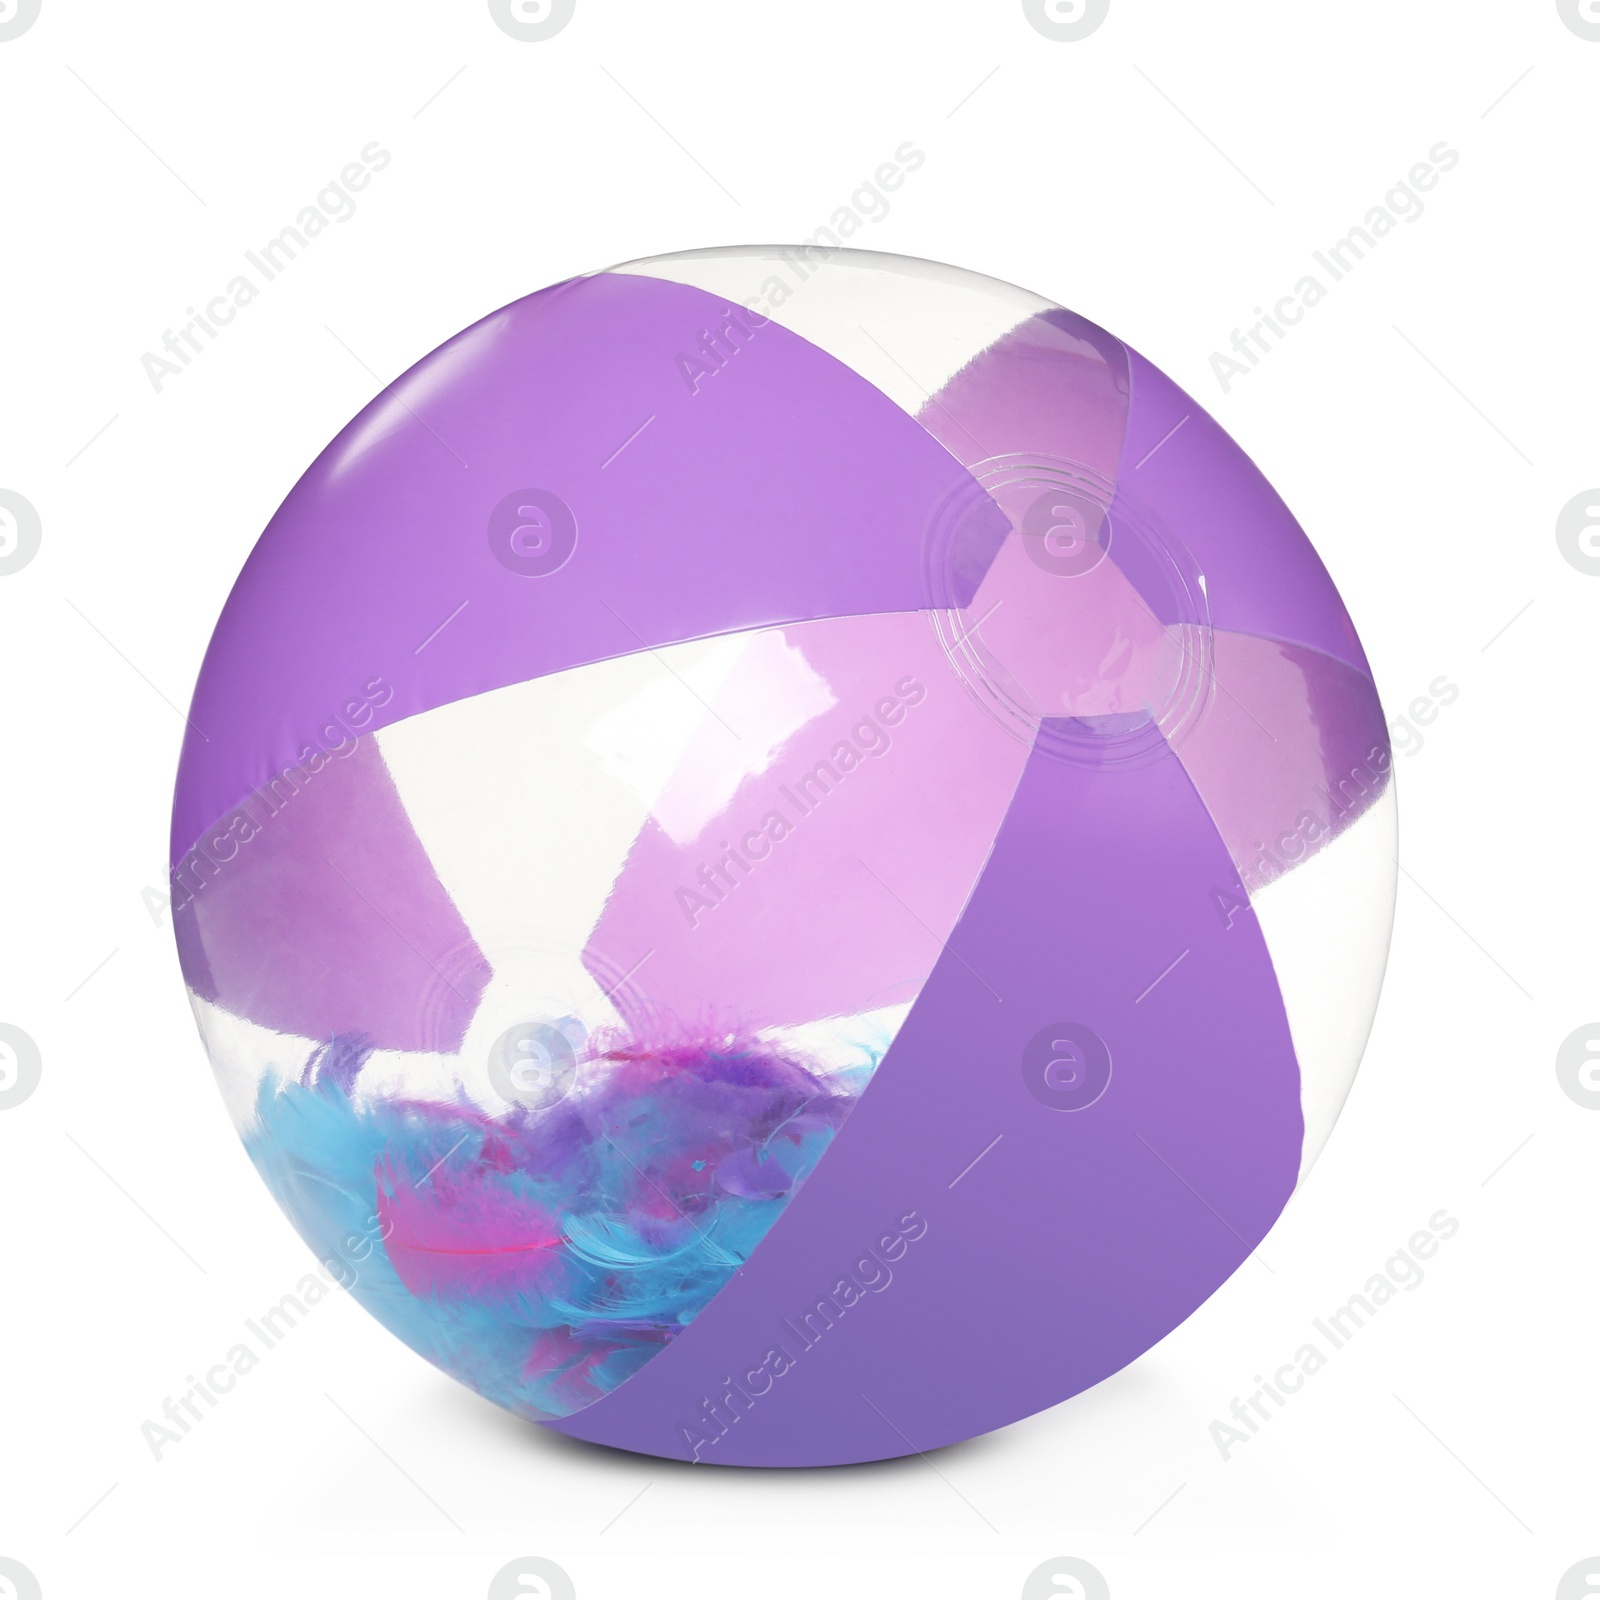 Photo of Inflatable beach ball with feathers inside isolated on white